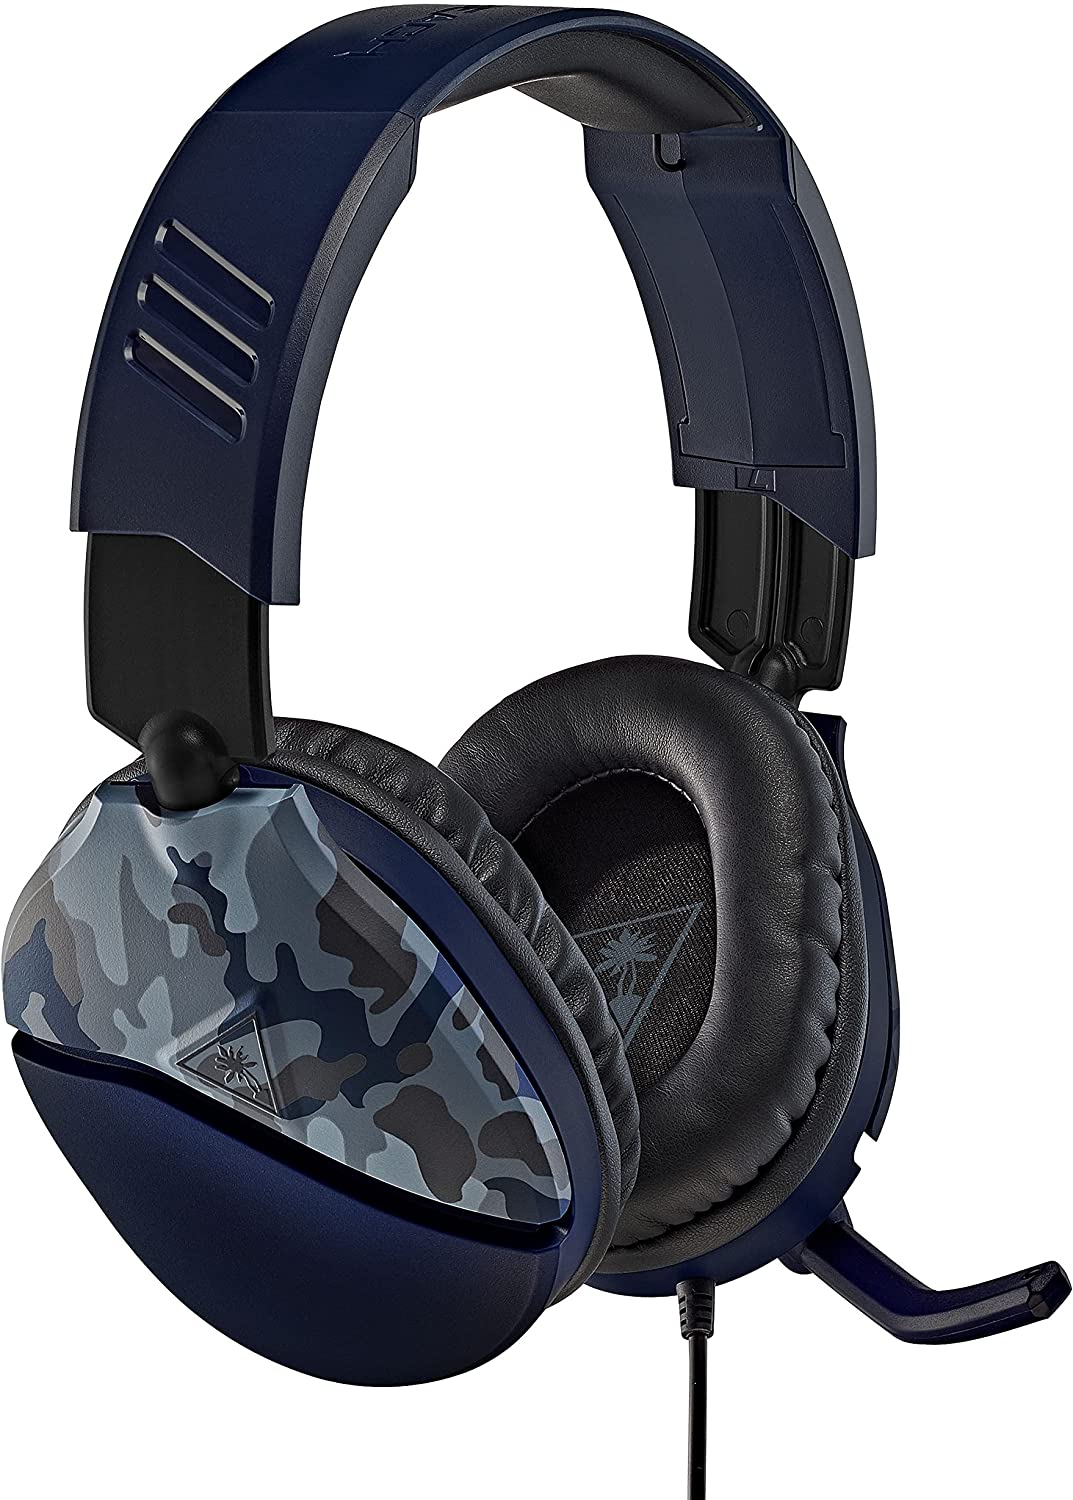 Turtle Beach Recon 70 Camo Blue Gaming Headset for PS5, PS4, Xbox Series X|S, Xb